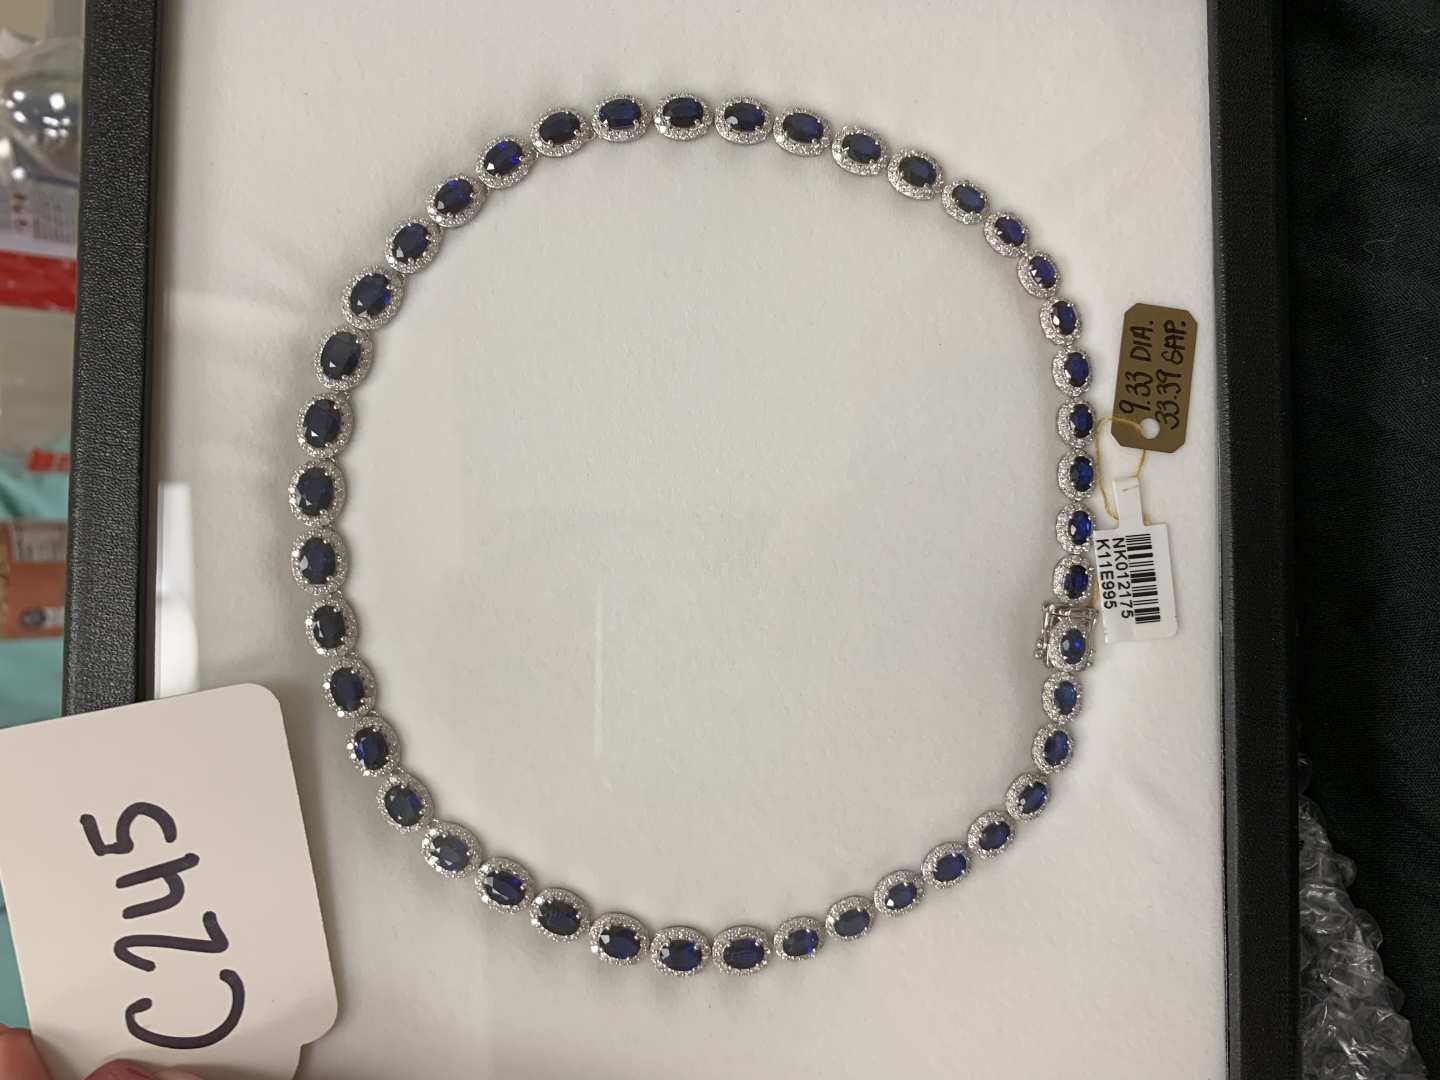 0th Image of a N/A NECKLACE DIAMOND & BLUE SAPPHIRE